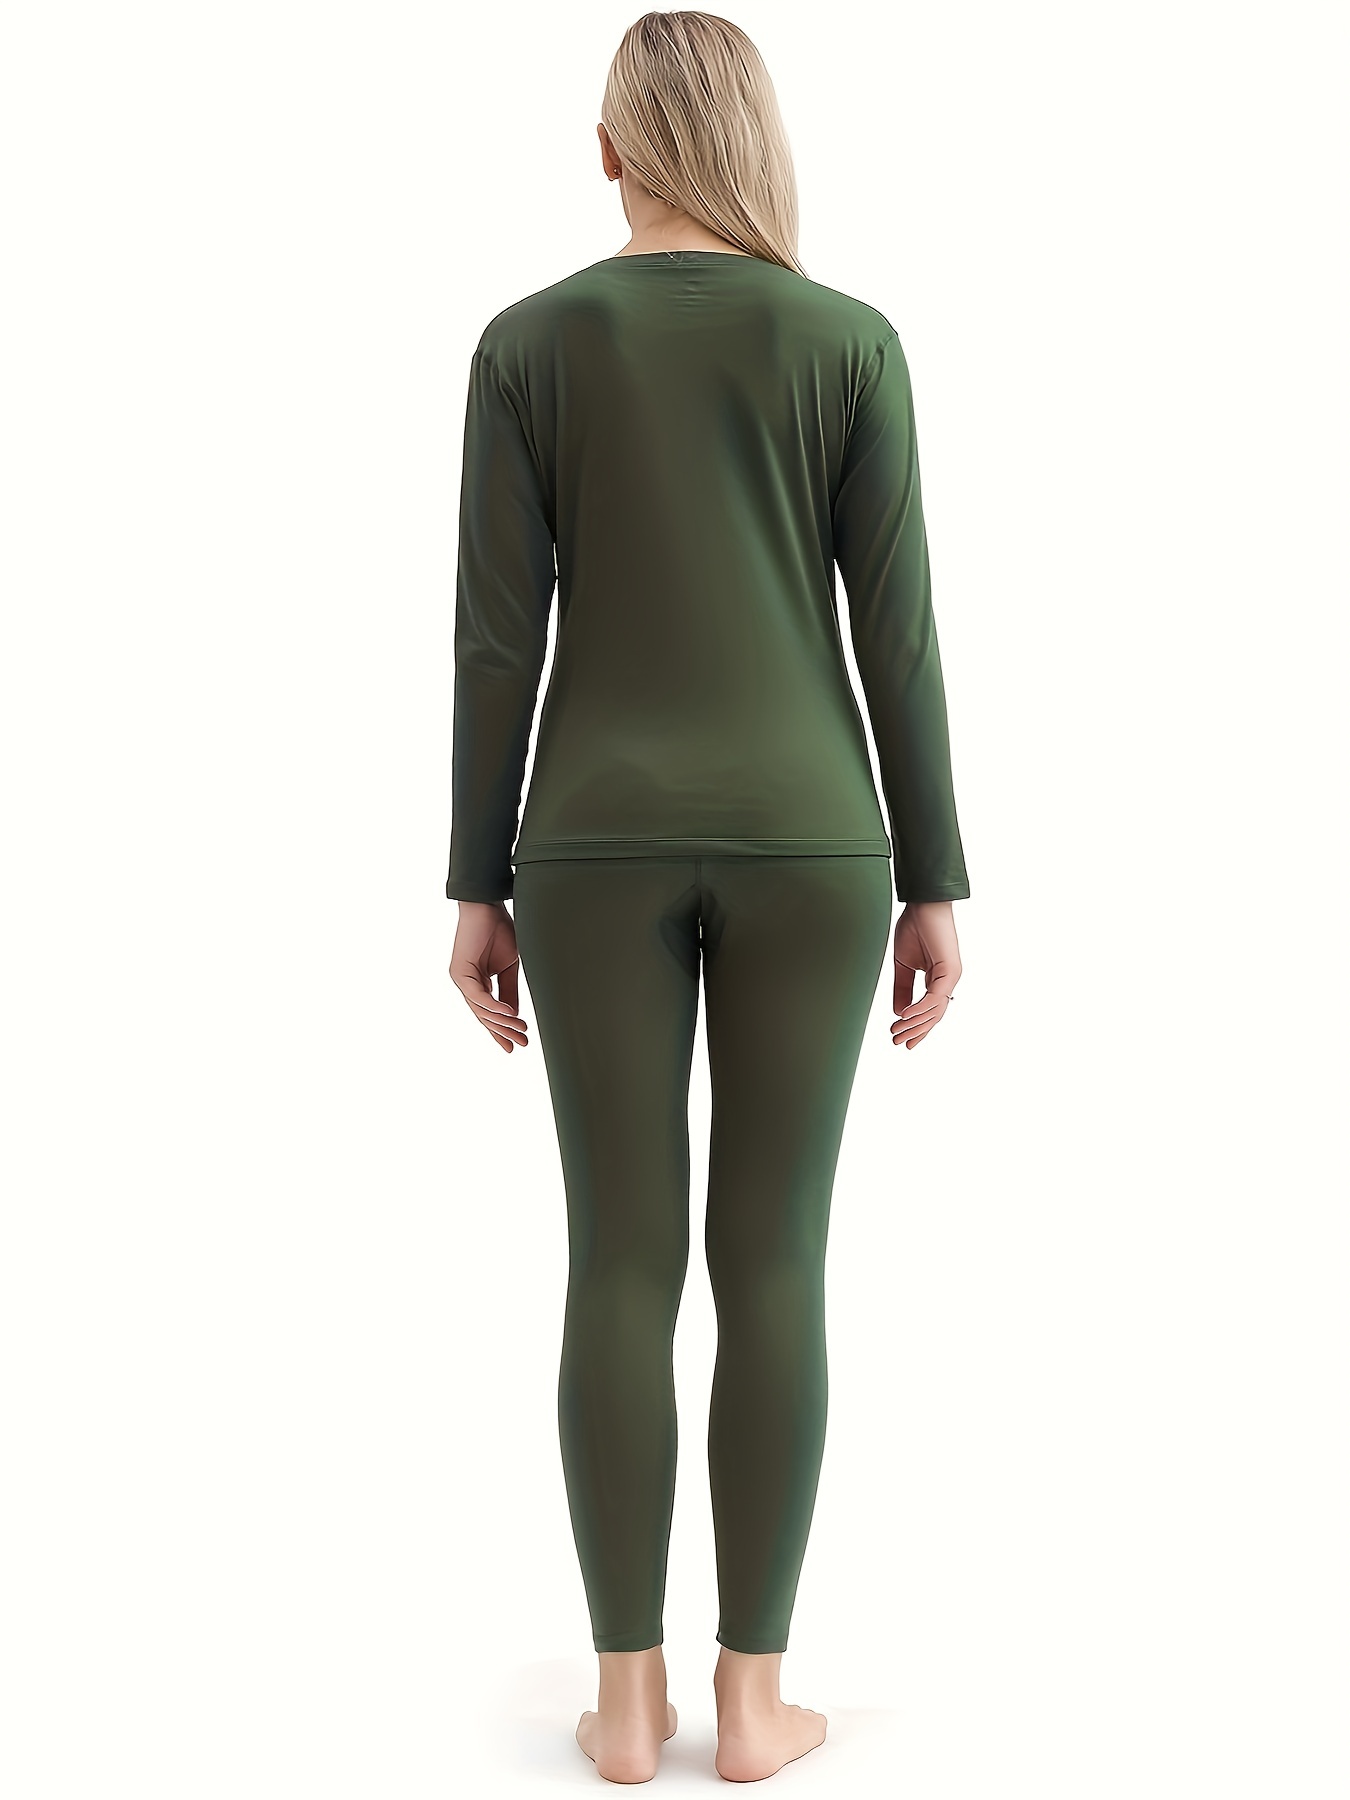 Thermal Underwear For Women Ultra-soft Long Johns Set Base Layer Skiing  Autumn Winter Warm Top & Bottom